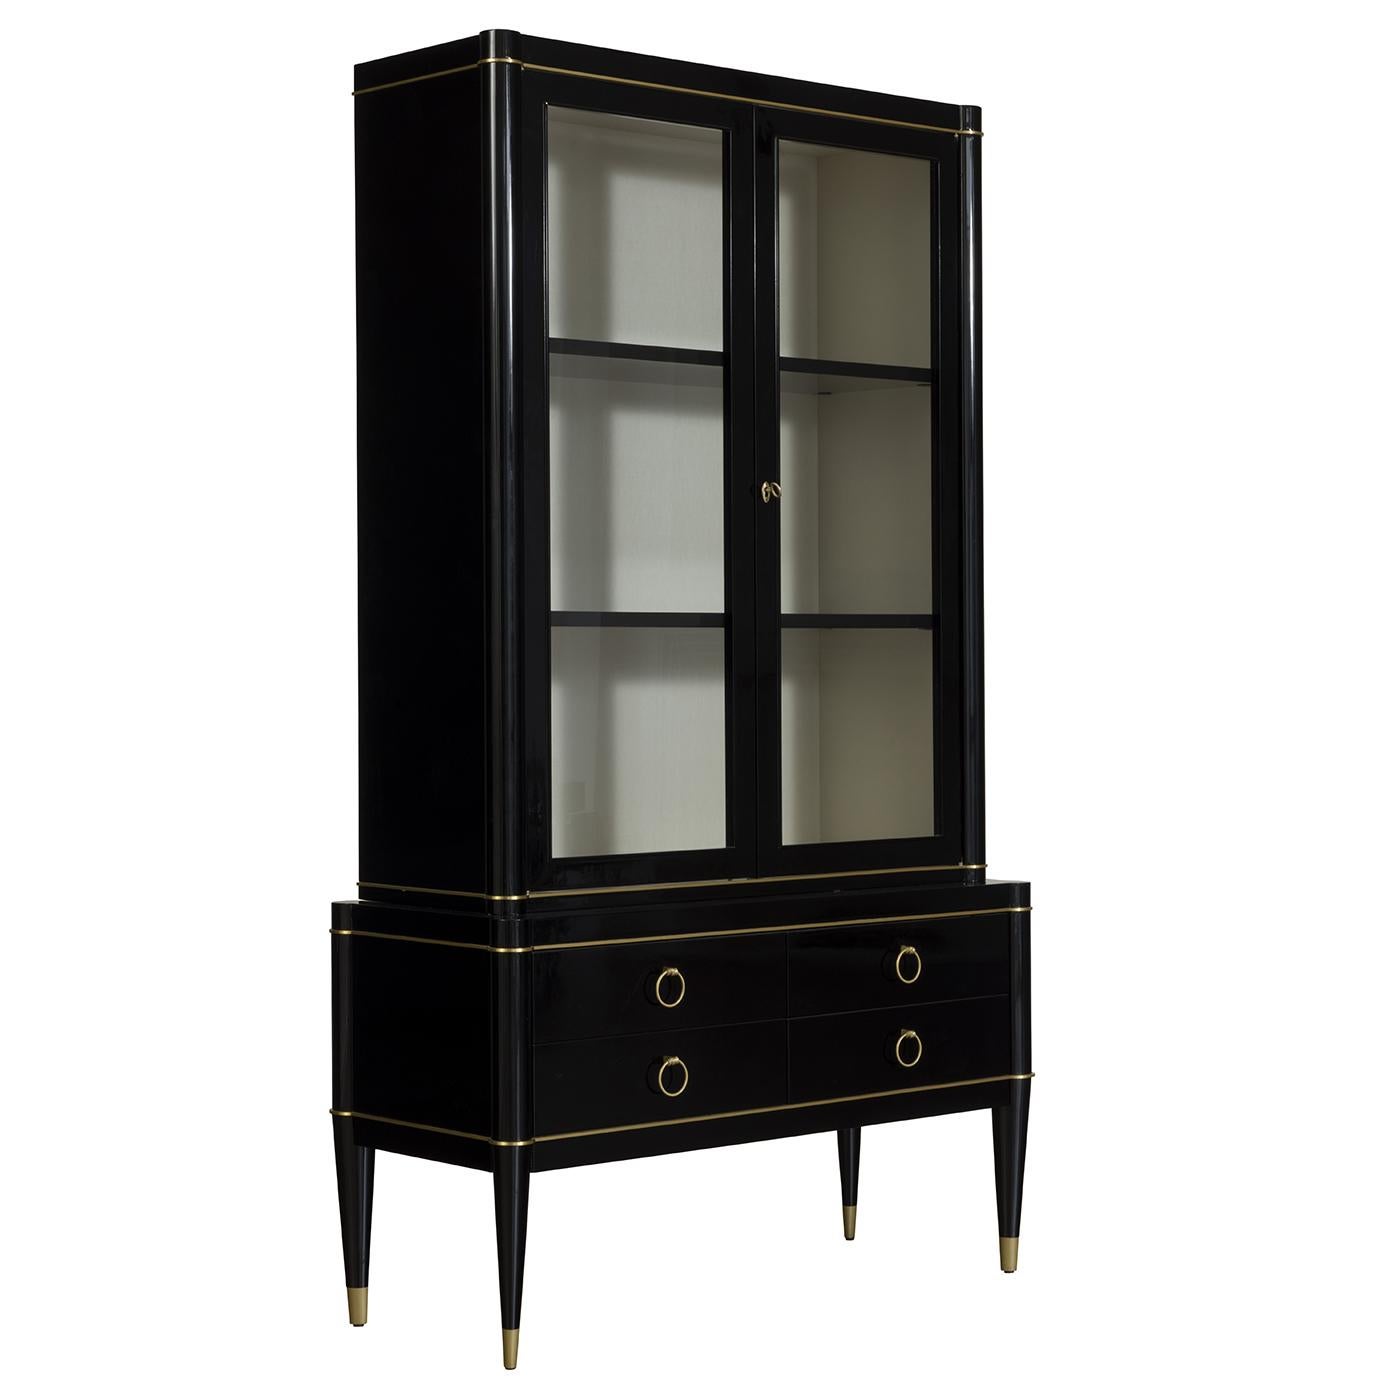 This elegant tall cabinet is part of the Ambra collection of fine, timeless pieces. A stunning addition to a Classic home, where it will store and display decorative ceramics and porcelain objects to adorn a stylish dining room, this cabinet was